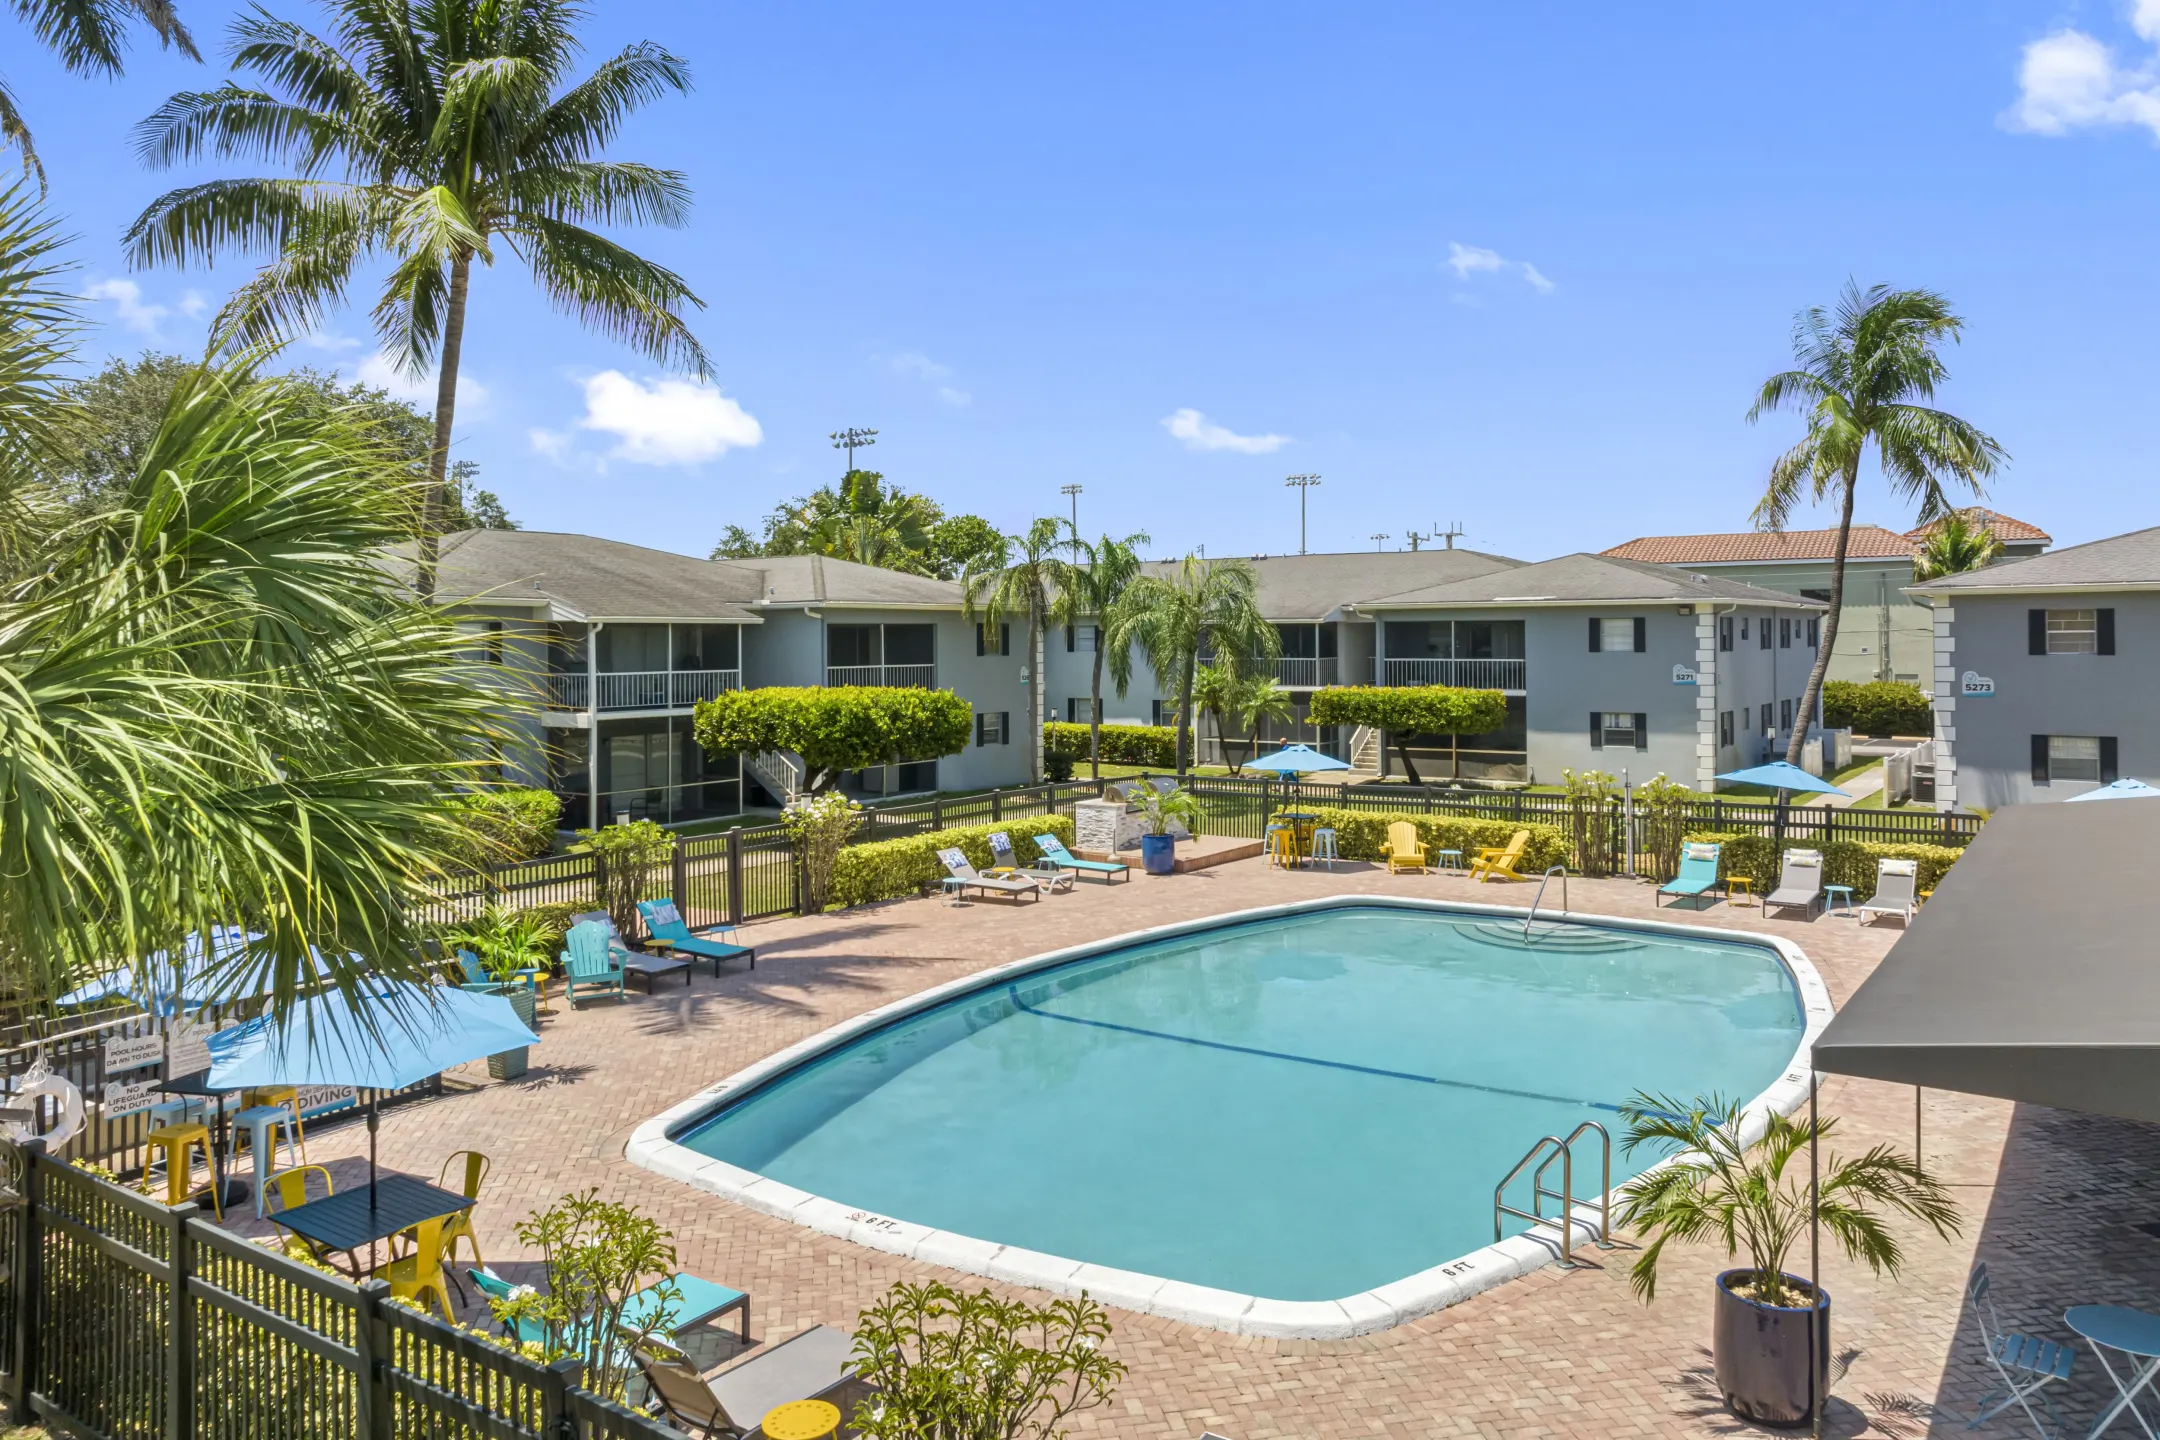 Pool - The Village at Eastpointe Apartments - Oakland Park, FL